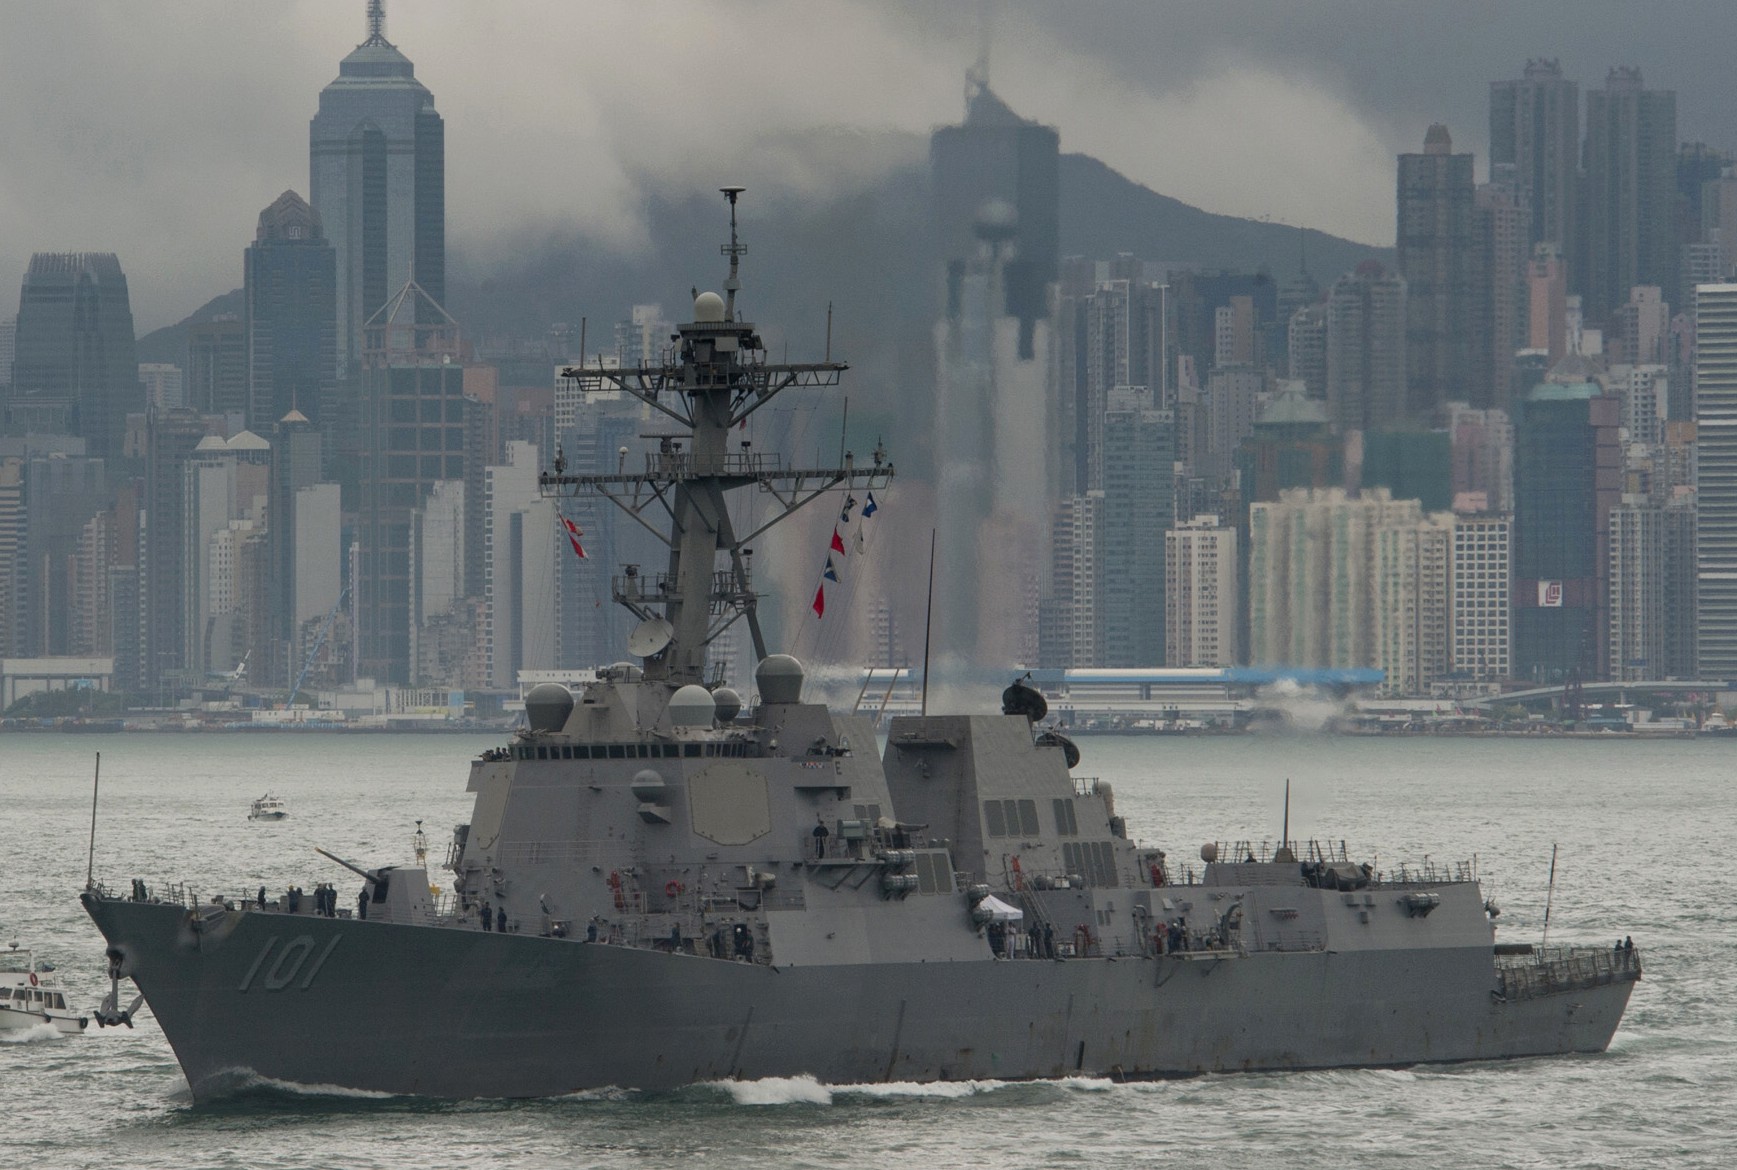 ddg-101 uss gridley arleigh burke class guided missile destroyer aegis us navy hong kong 28